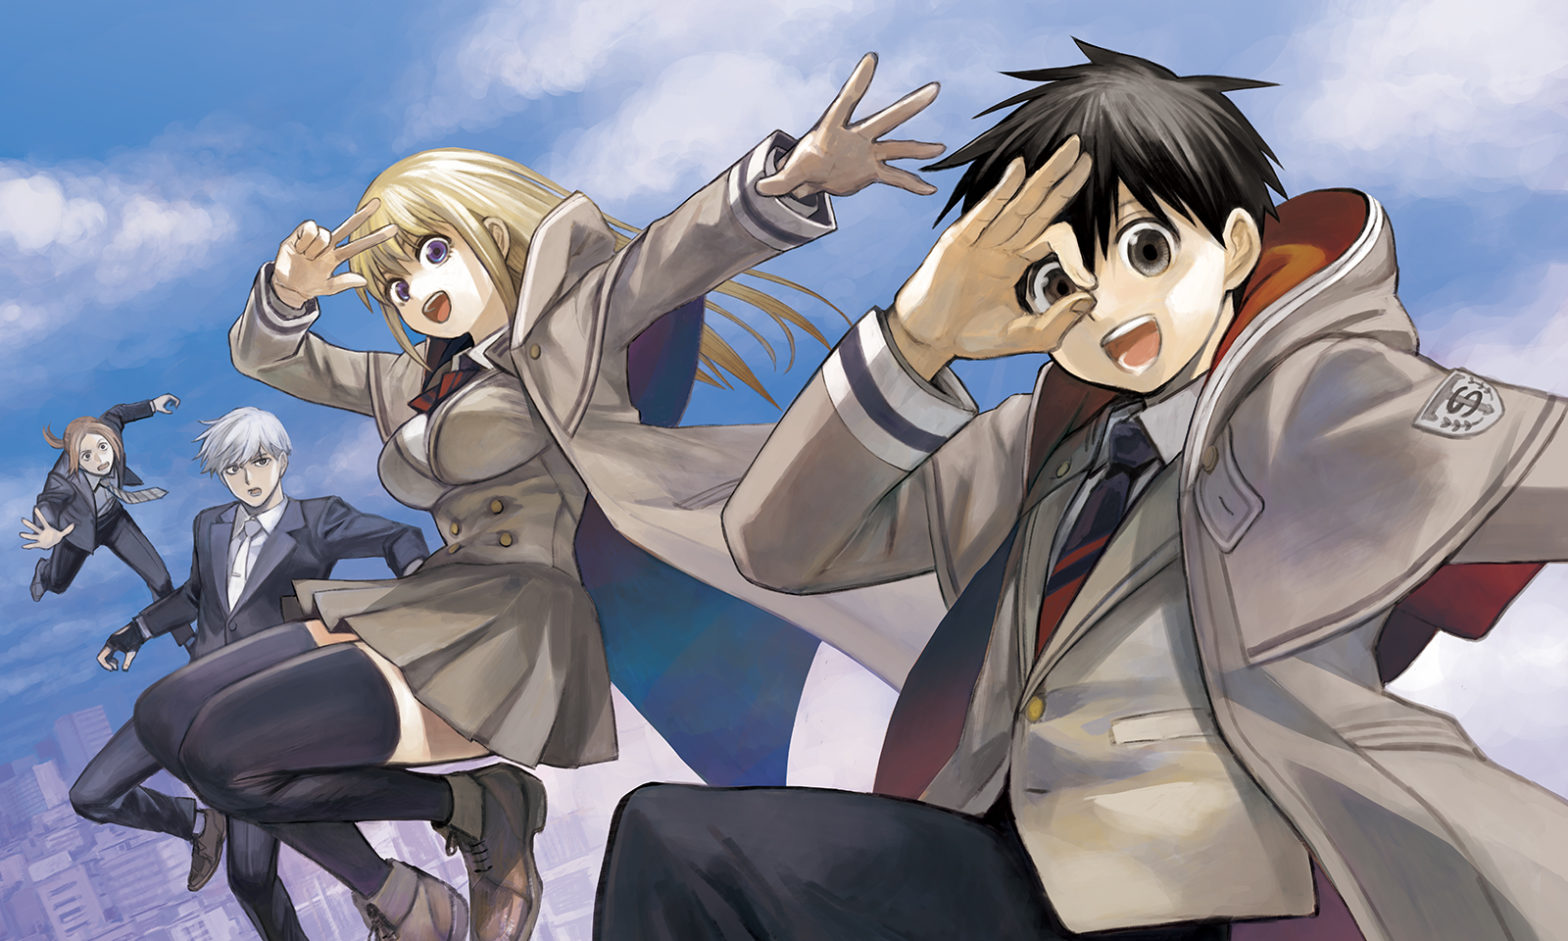 The cast of The World of Summoning jumping in the air. There’s a young high school boy and girl and two young men in suits.